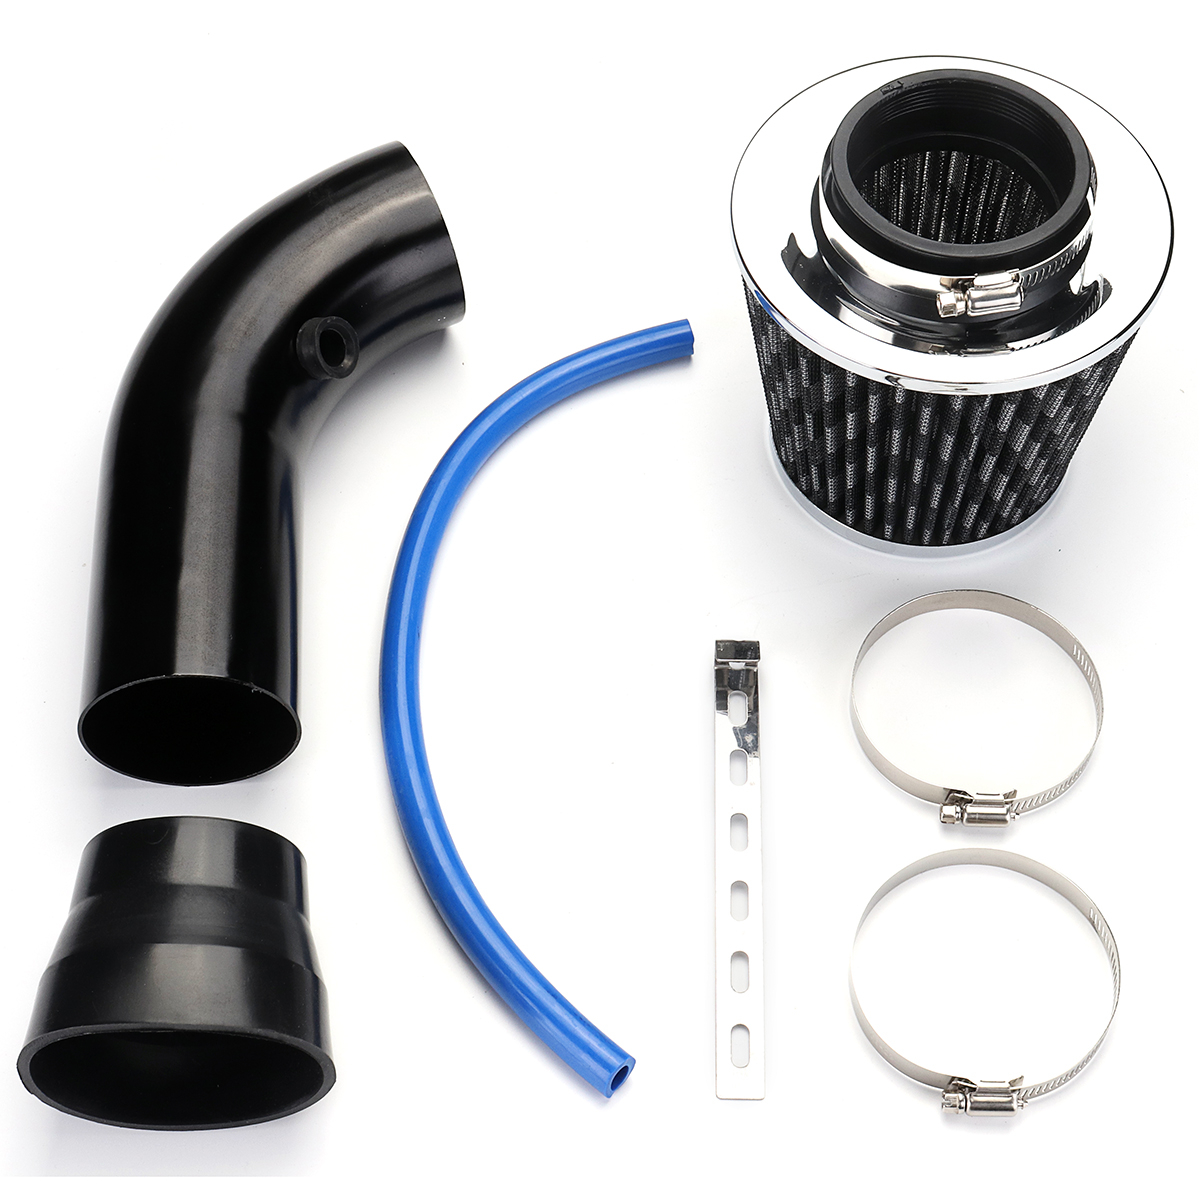 76mm-3-Inch-Universal-Car-Cold-Air-Intake-Filter-and-Alumimum-Induction-Kit-Pipe-Hose-1391261